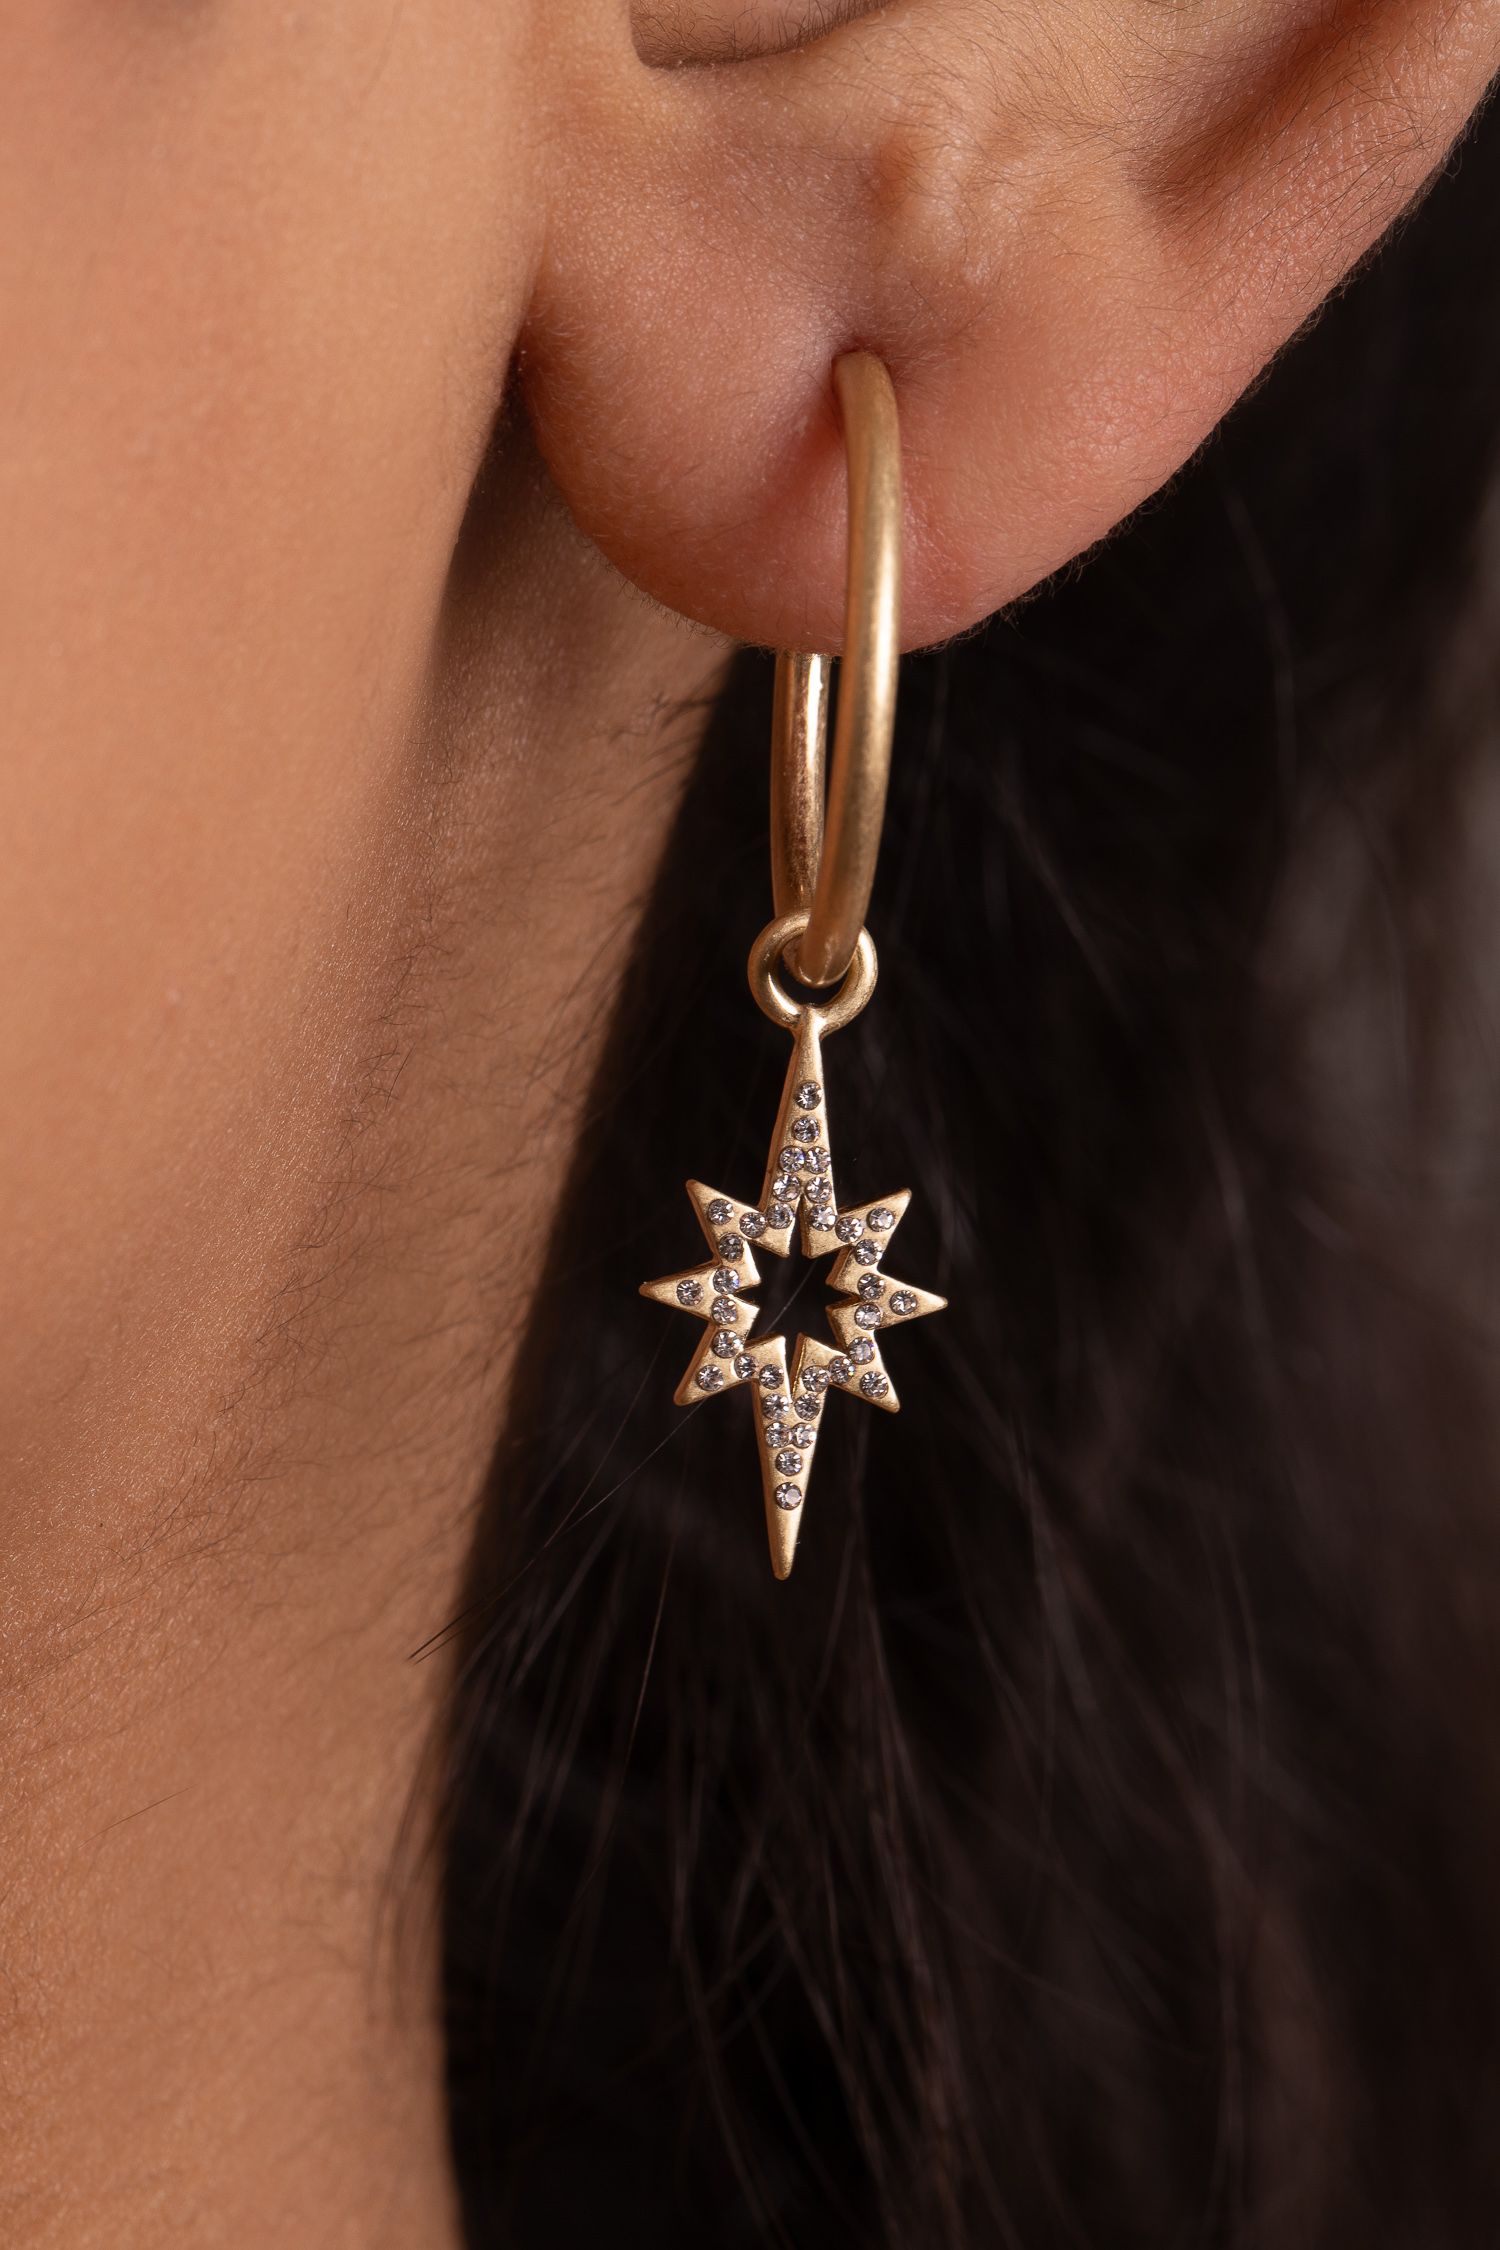 Our new Kate Thornton gold plated 'Celeste' star drop earrings will really make a style statement this season. A striking piece of jewellery which makes the perfect accompaniment to any outfit.  Delicate, eye catching and with a contemporary edge these drop earrings will look great when worn alone or paired with other styles for a really on trend look. The gold tone earrings feature an 18mm hoop and delicate 27mm pave star charm. Presented in a KTx jewellery pouch to keep your jewellery safe or ideal for gifting!